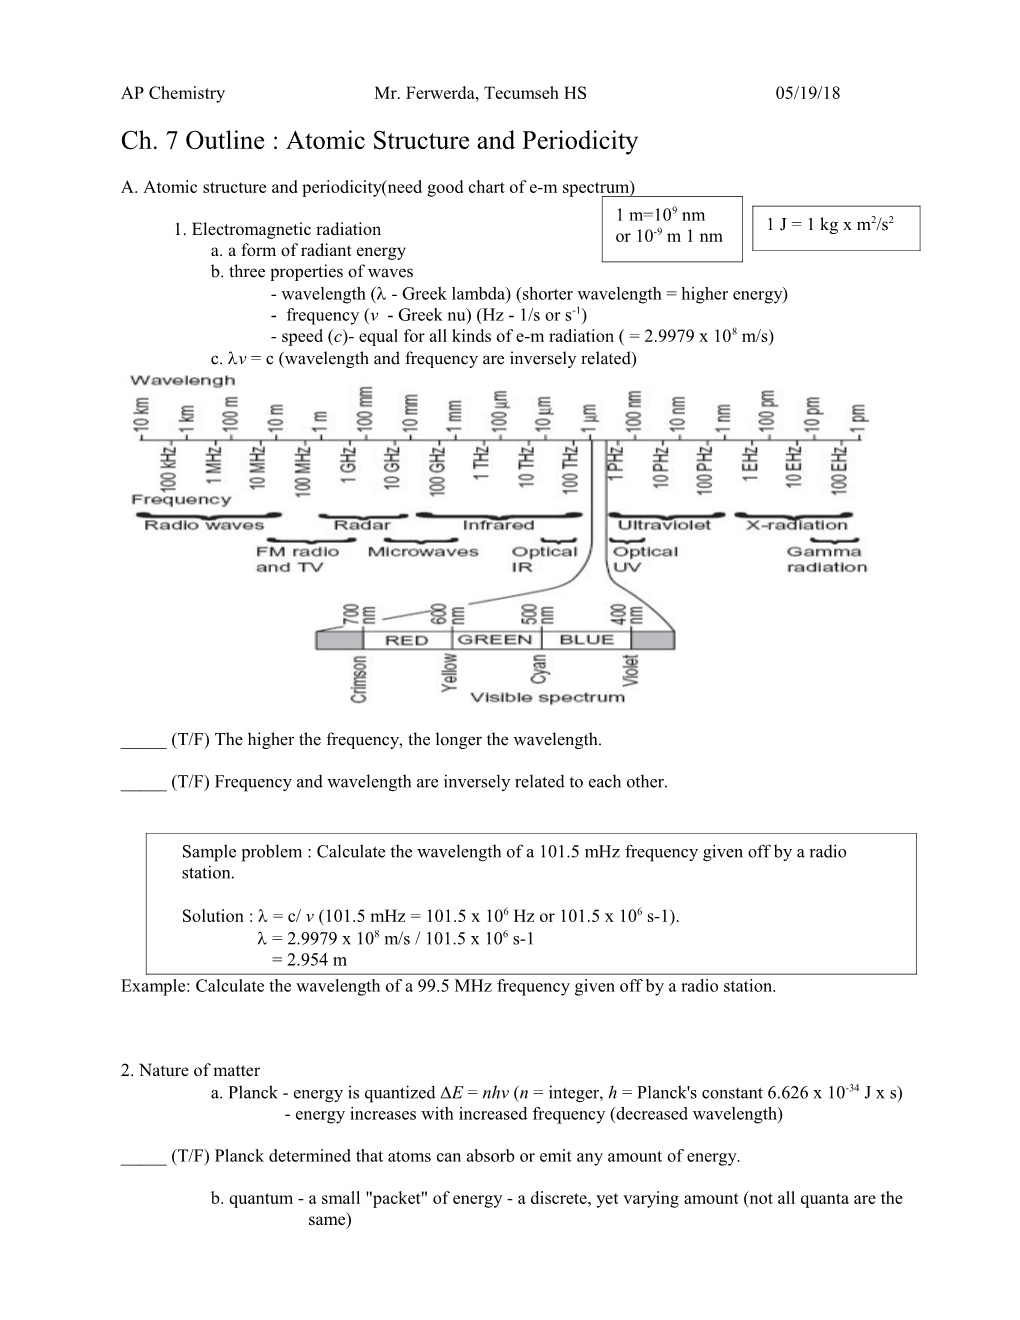 Ch. 7 Outline : Atomic Structure and Periodicity